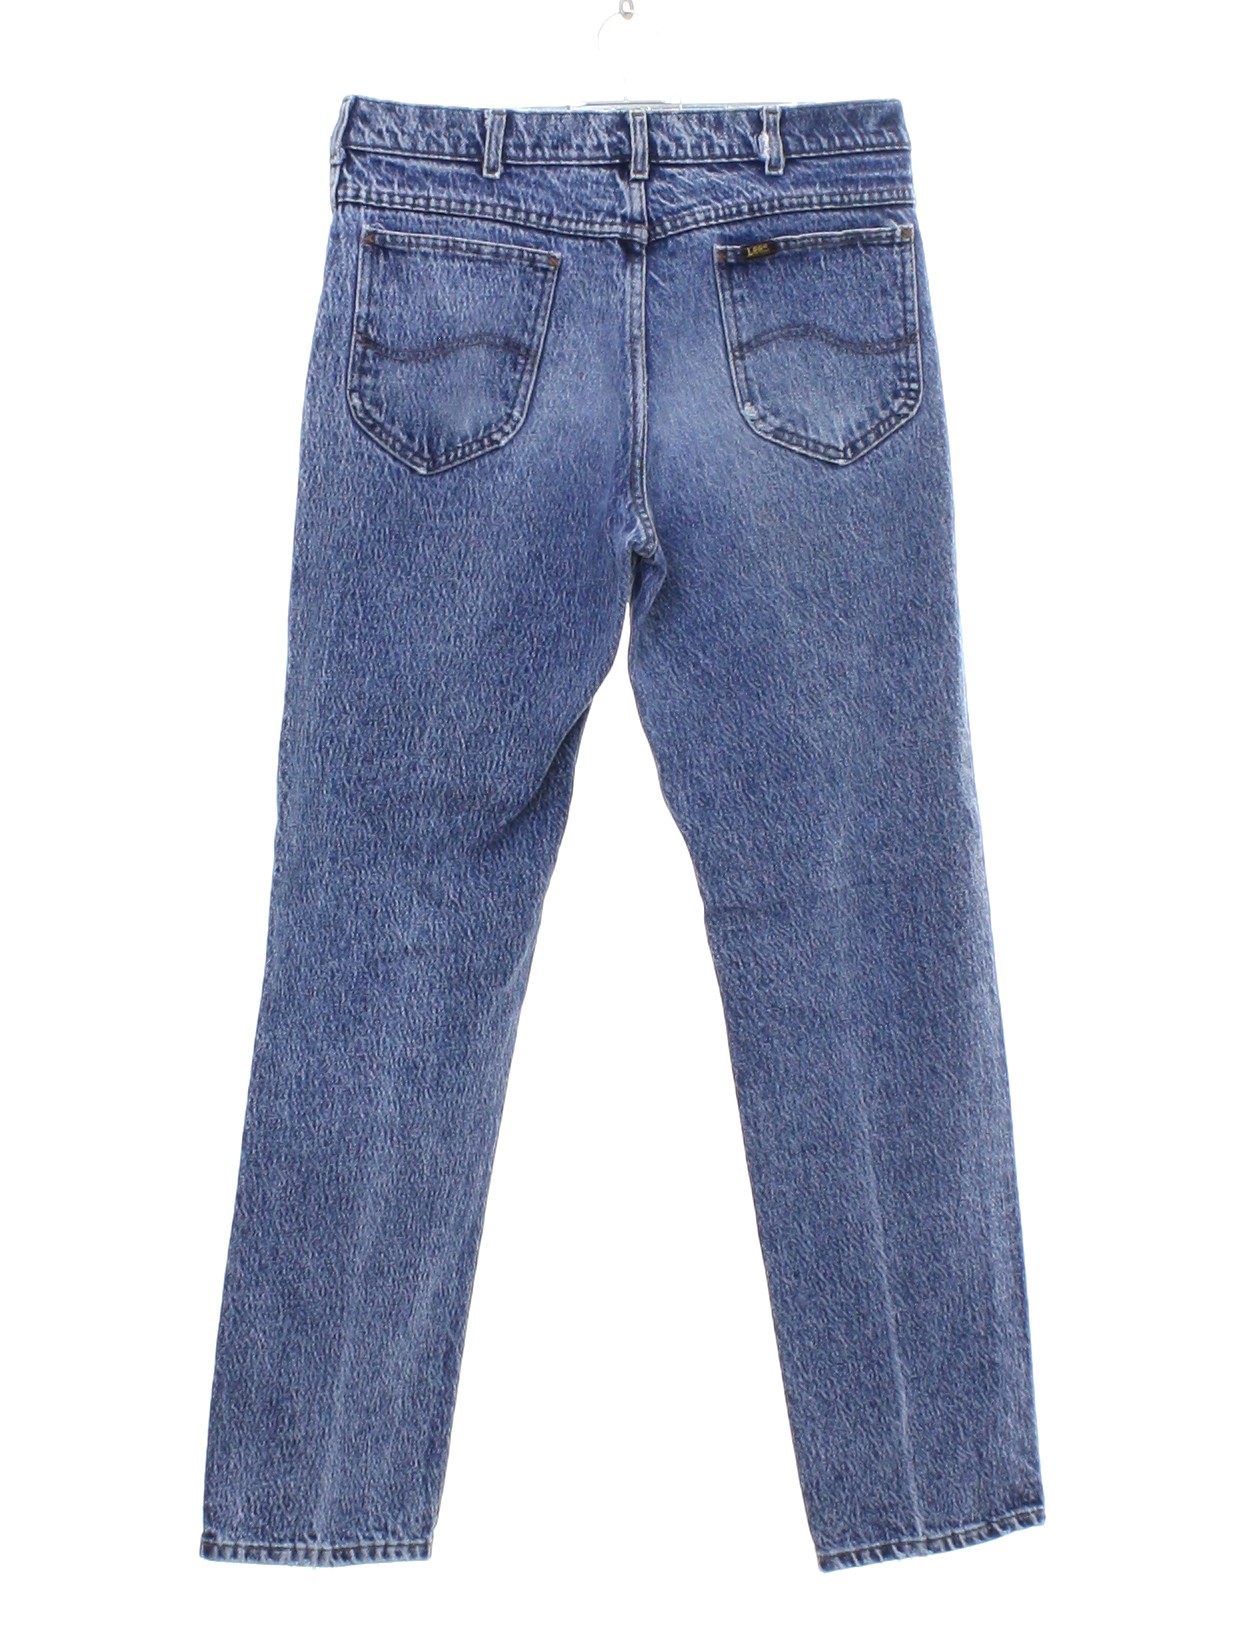 1980's Retro Pants: 80s -Lee- Mens acid washed heavily faded and worn ...